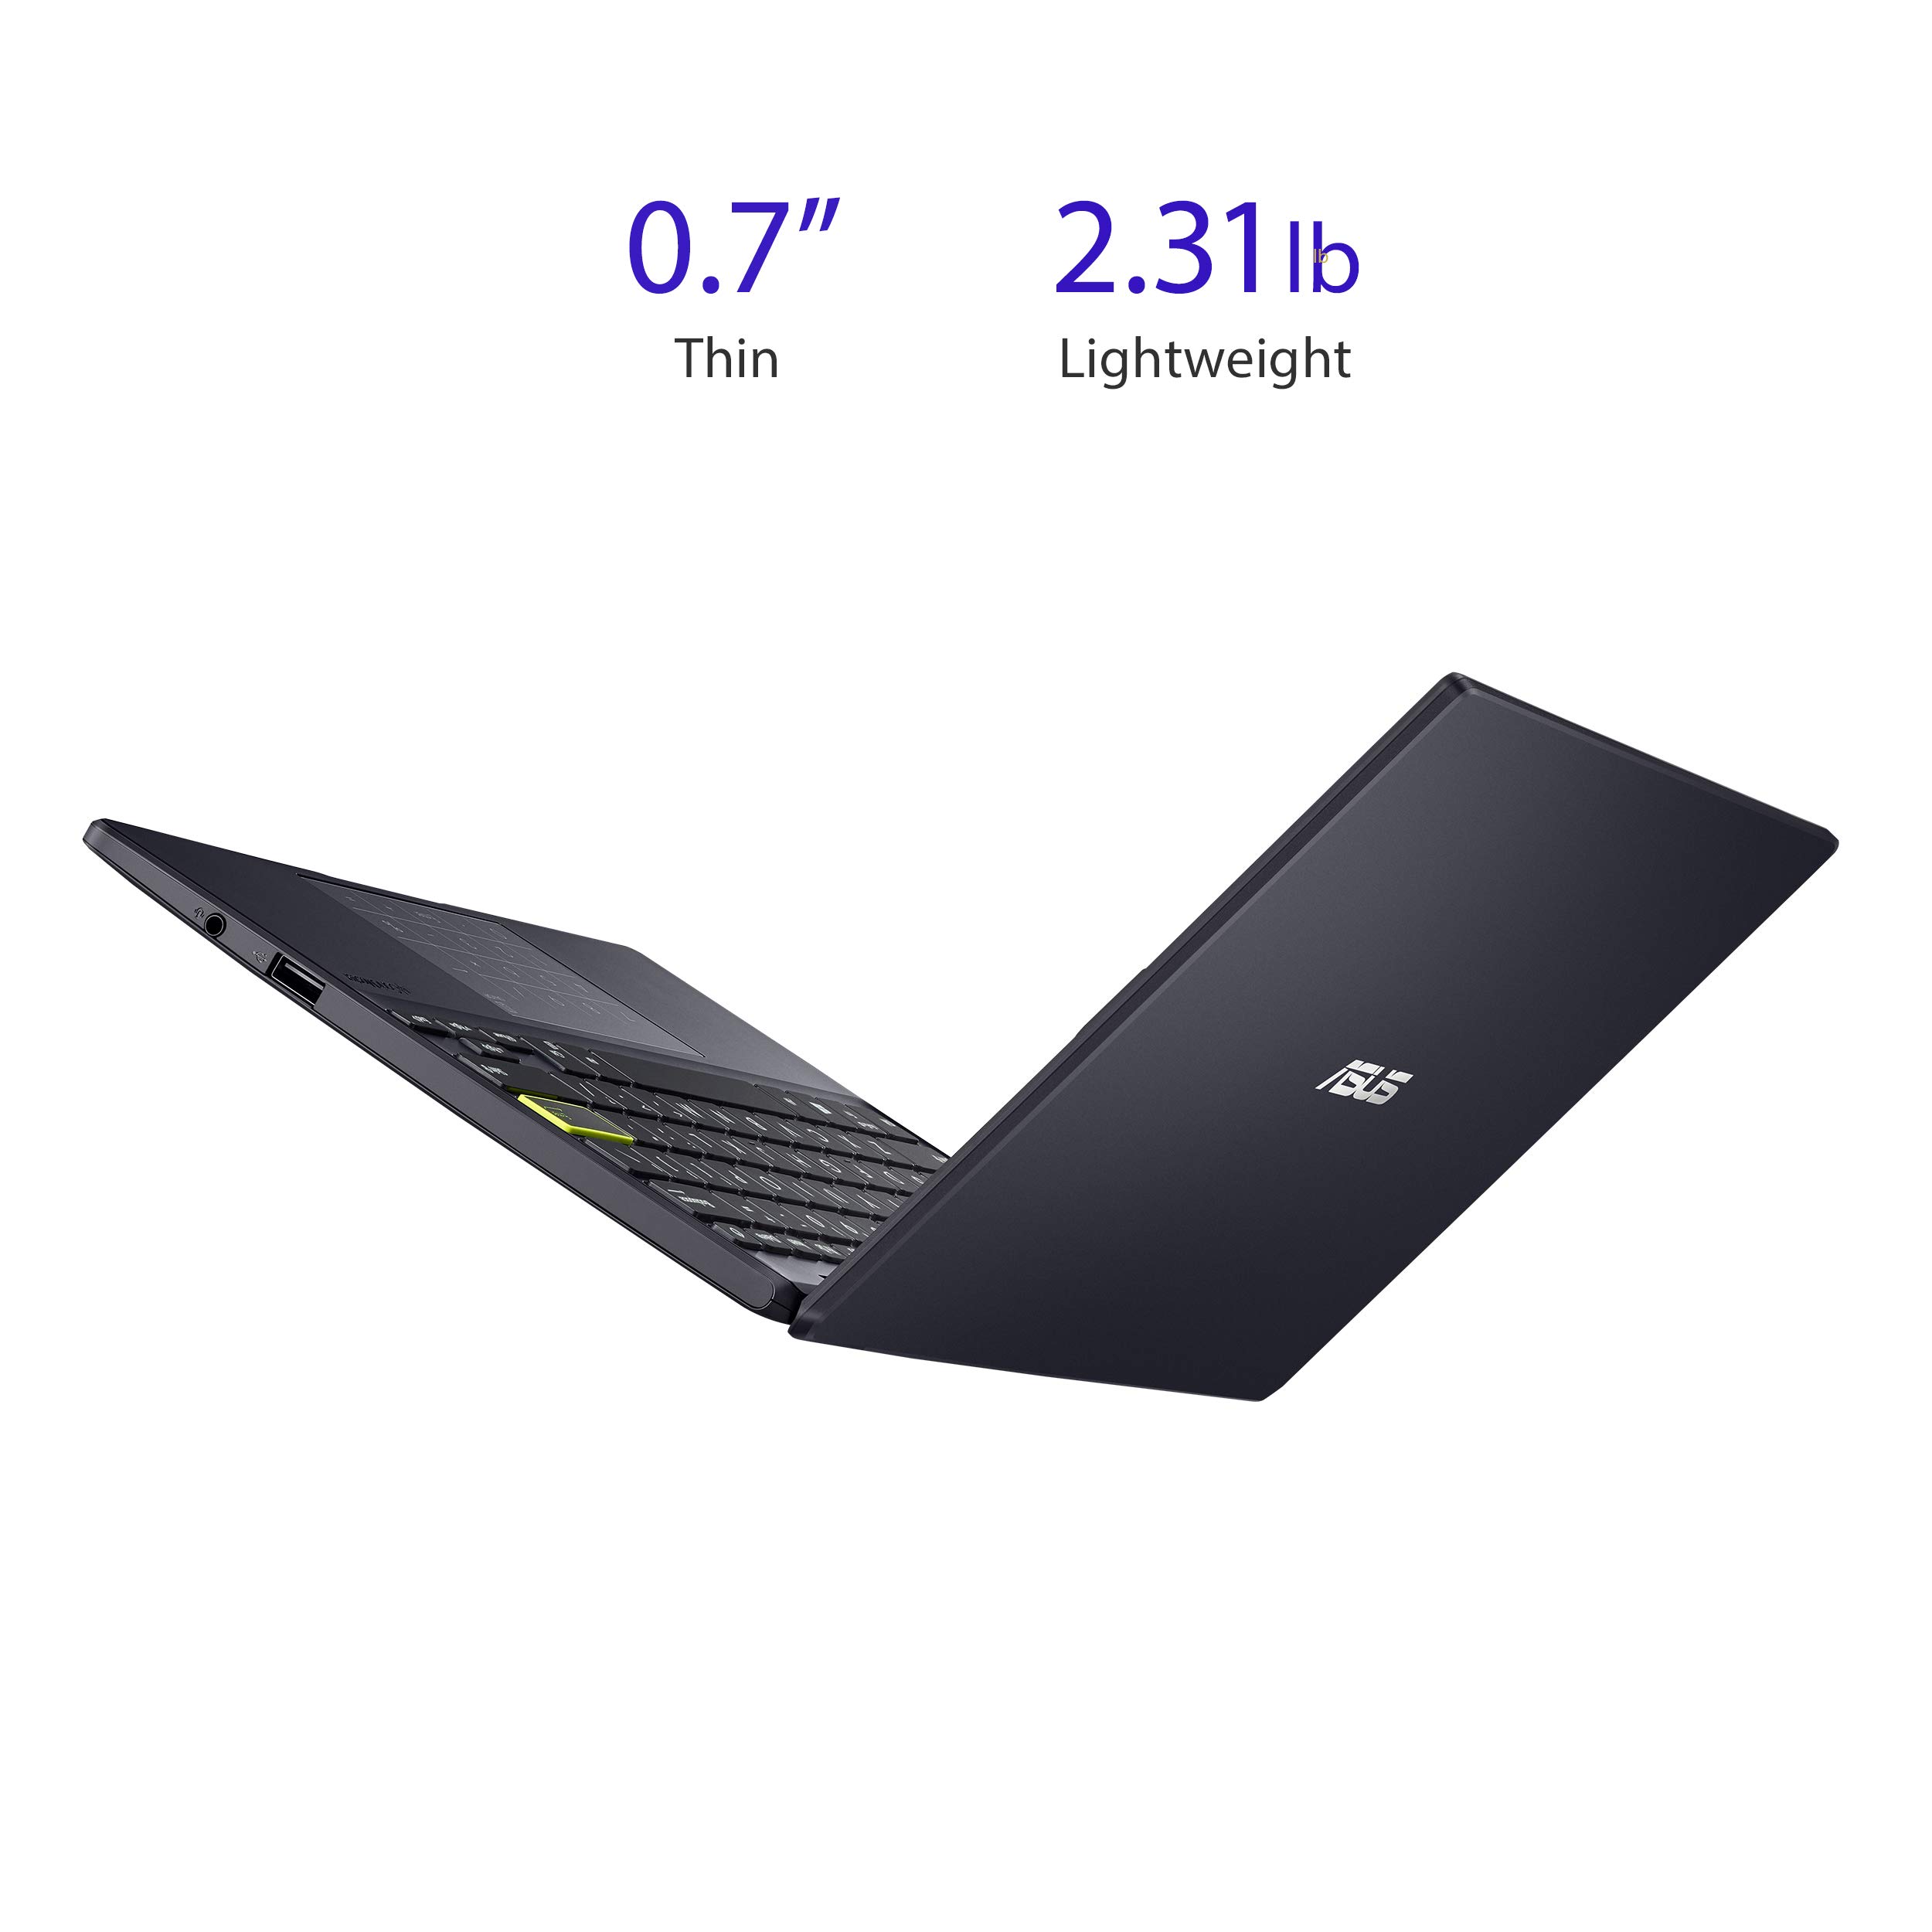 ASUS Notebook E210 11.6” Ultra Thin, Intel Celeron N4020 Processor, 4GB RAM, 64GB eMMC Storage, Windows 10 Home in S Mode with One Year of Office 365 Personal, E210MA-DB02,Star Black